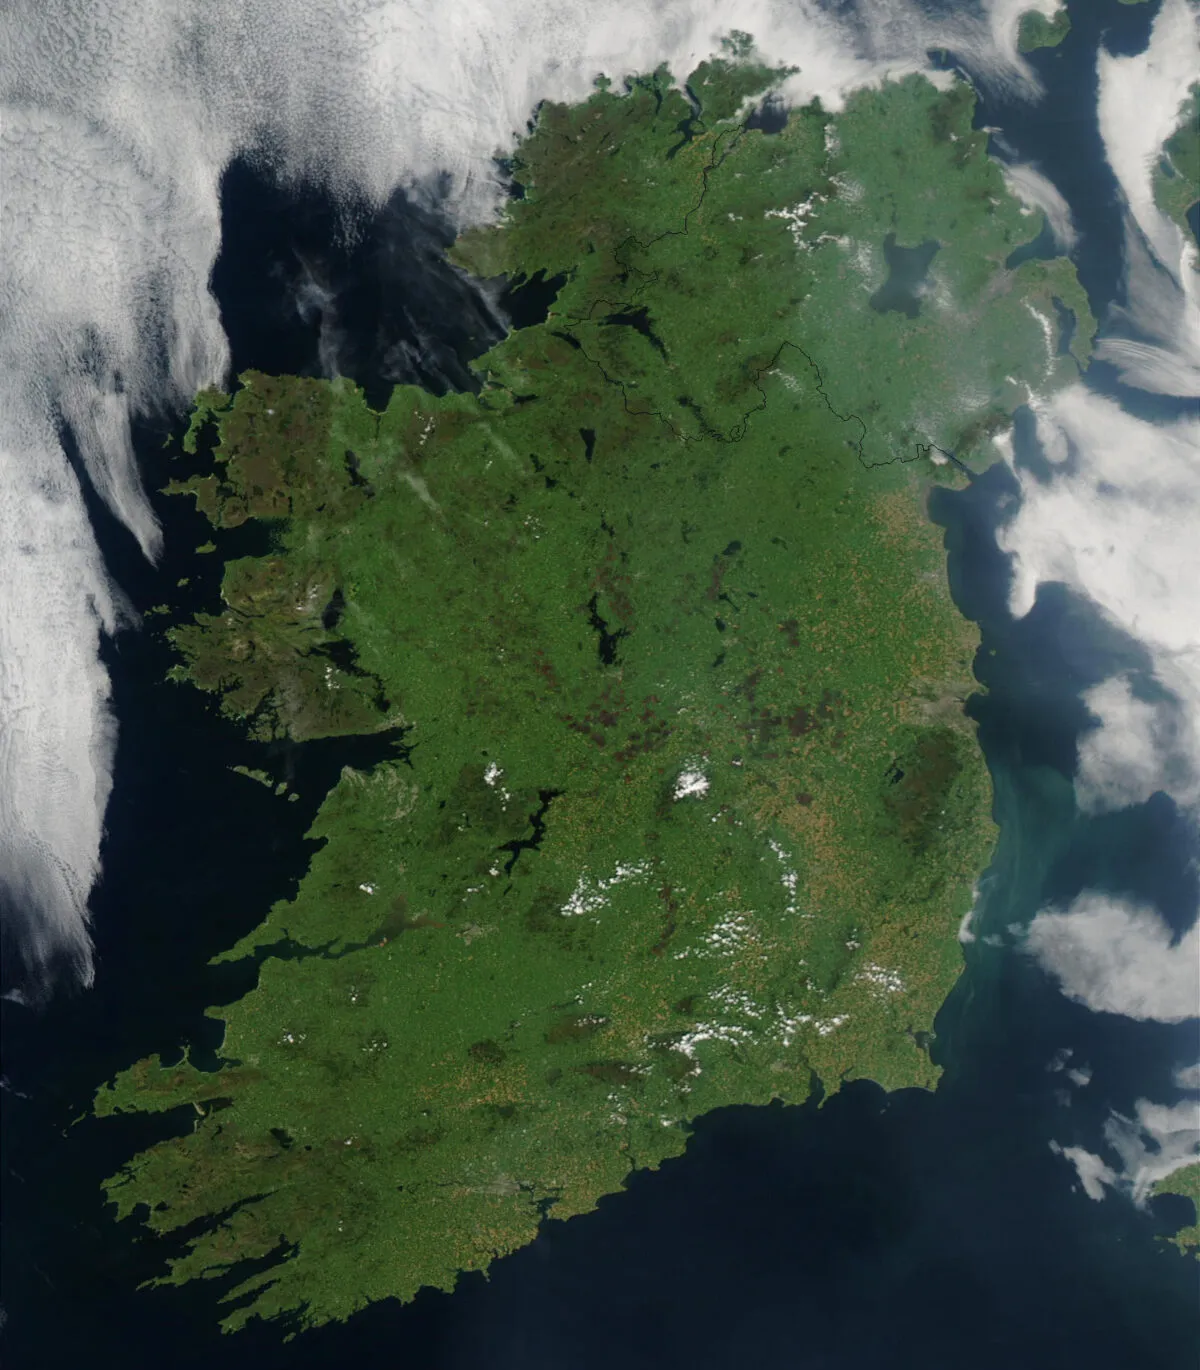 This image of Ireland was captured by the MODIS instrument onboard the Earth-orbiting Aqua satellite on 7 August 2003. The satellite's mission is to monitor natural systems on Earth and in the oceans, in order to better inform environmental protection. Easily discernable on the map is Dublin, the capital city of the Republic of Ireland, which can be seen about halfway down the east coast. Just south of the city, the light blue-green smudge in the Irish Sea is actually drifting phytoplankton. Credit: Jeff Schmaltz, MODIS Rapid Response Team, NASA/GSFC